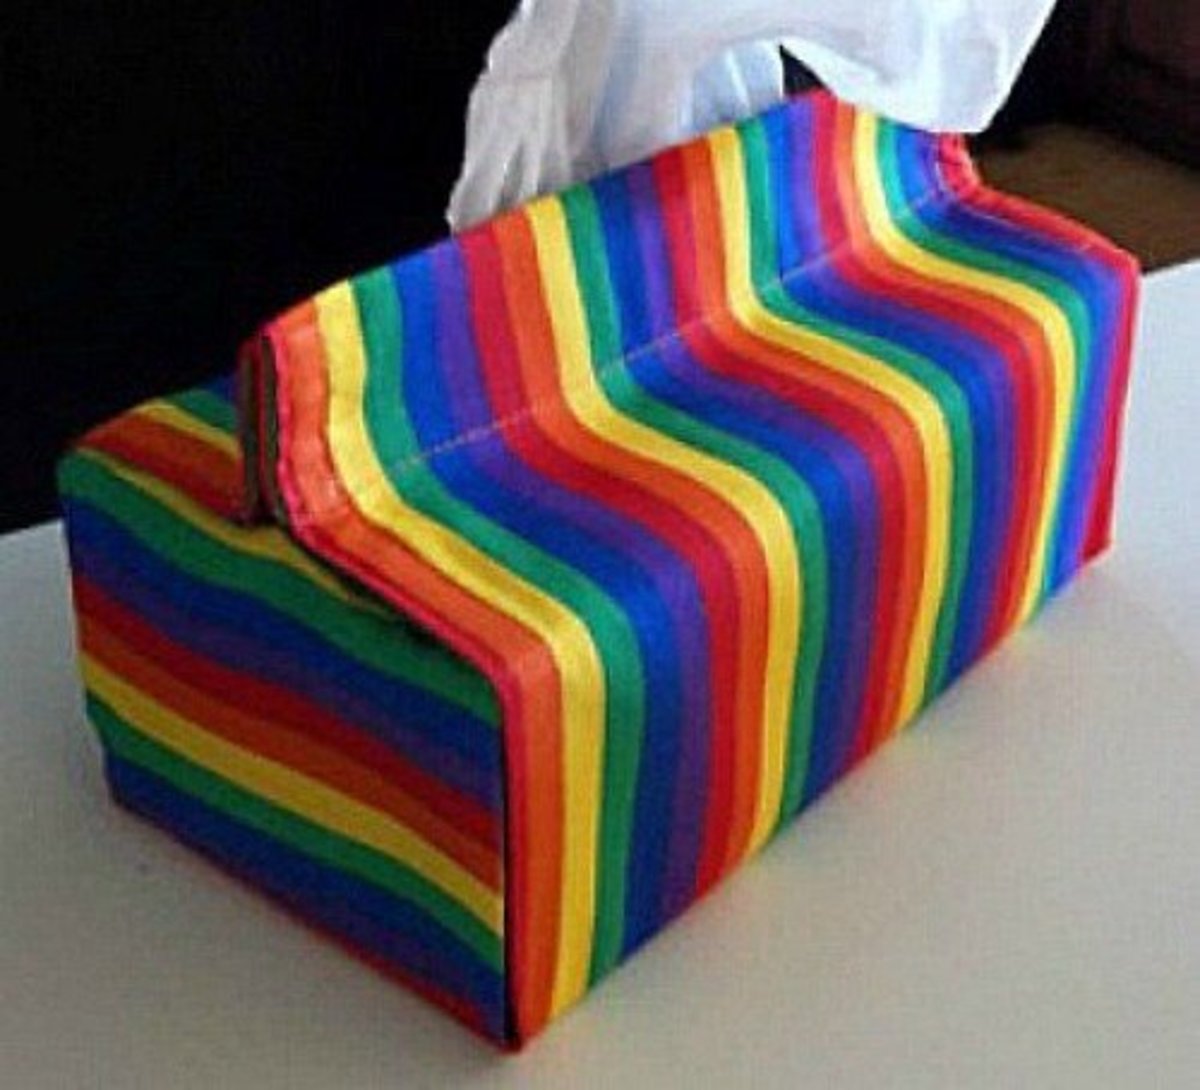 make-reusable-tissue-box-covers-free-patterns-and-tutorial-feltmagnet